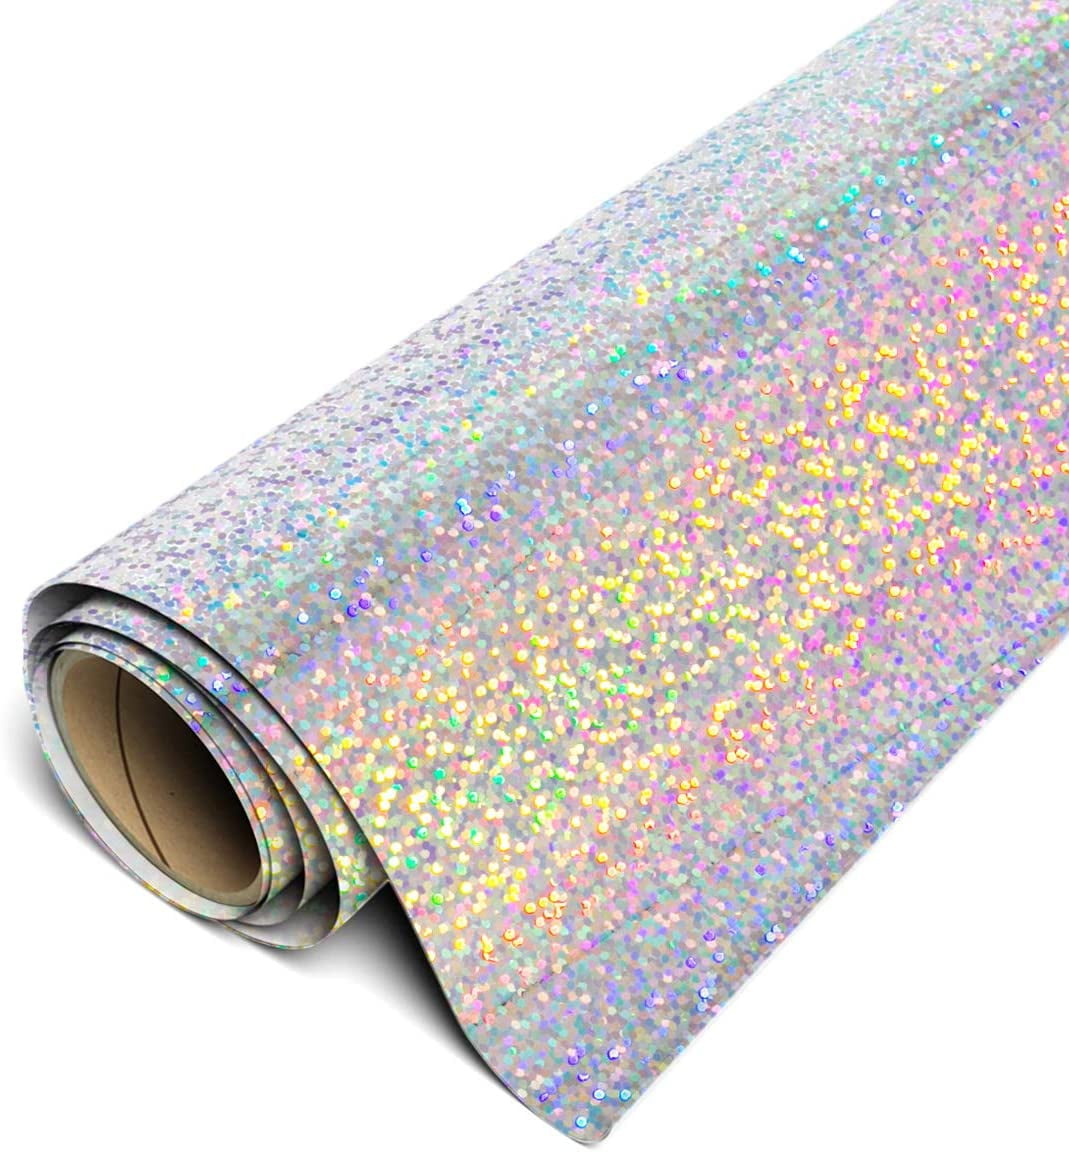 Holographic HTV Heat Transfer Vinyl Iron On Silver Material (12in x 15ft)  Iridescent Color Changing Roll by The Yard for DIY T-Shirts or Fabrics